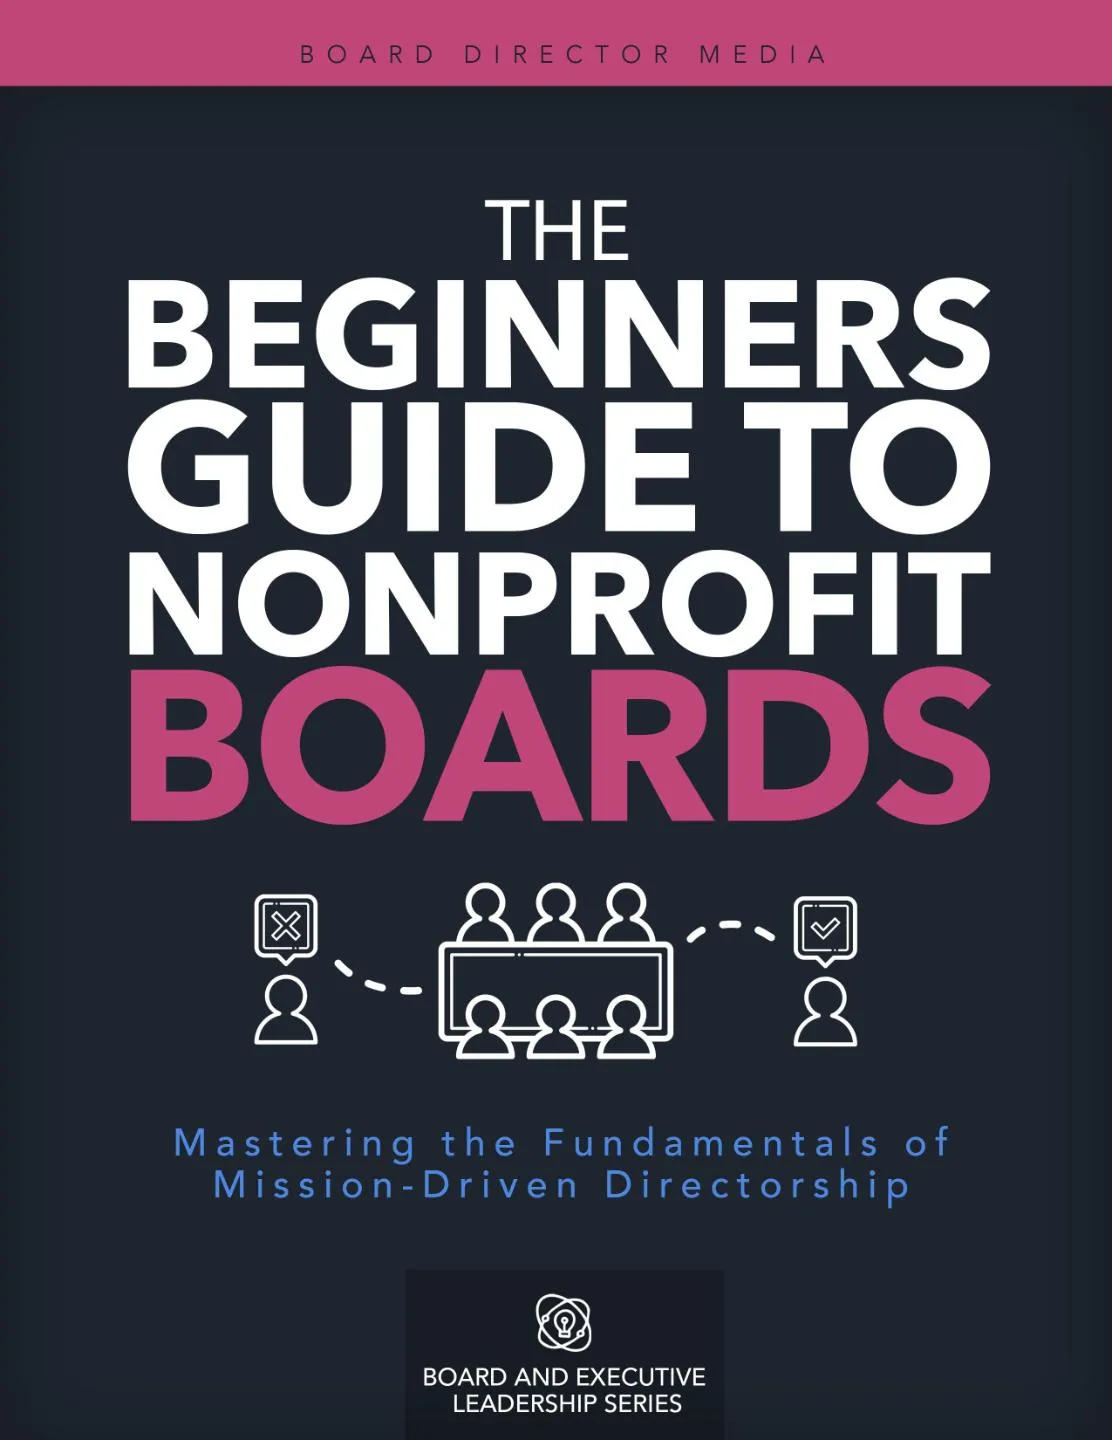 Beginner's Guide to Nonprofit Boards Book